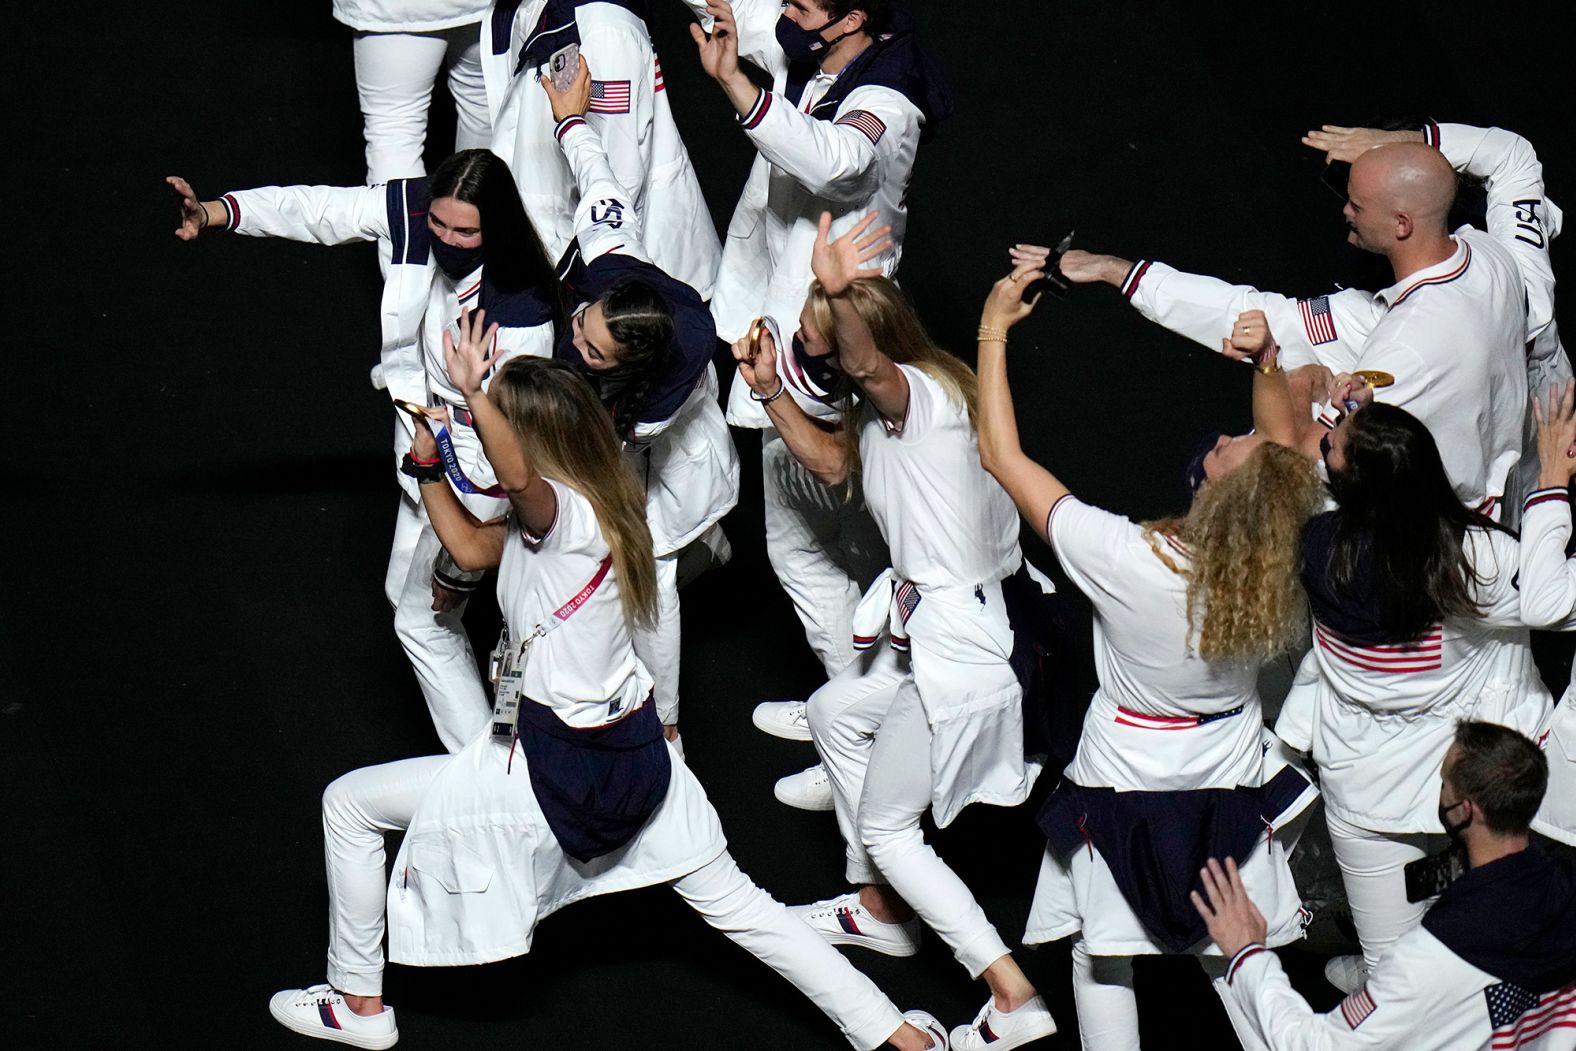 American athletes show their medals to a video camera at the closing ceremony. <a href="https://www.cnn.com/2021/08/08/sport/olympics-usa-most-medals/index.html" target="_blank">The United States finished on top of the medal table</a> for the third straight Summer Olympics, winning 39 gold medals and 113 medals in all. Second-place China finished with 38 golds and 88 medals in all. Host nation Japan had a third-best 27 golds and won a total of 58 medals.